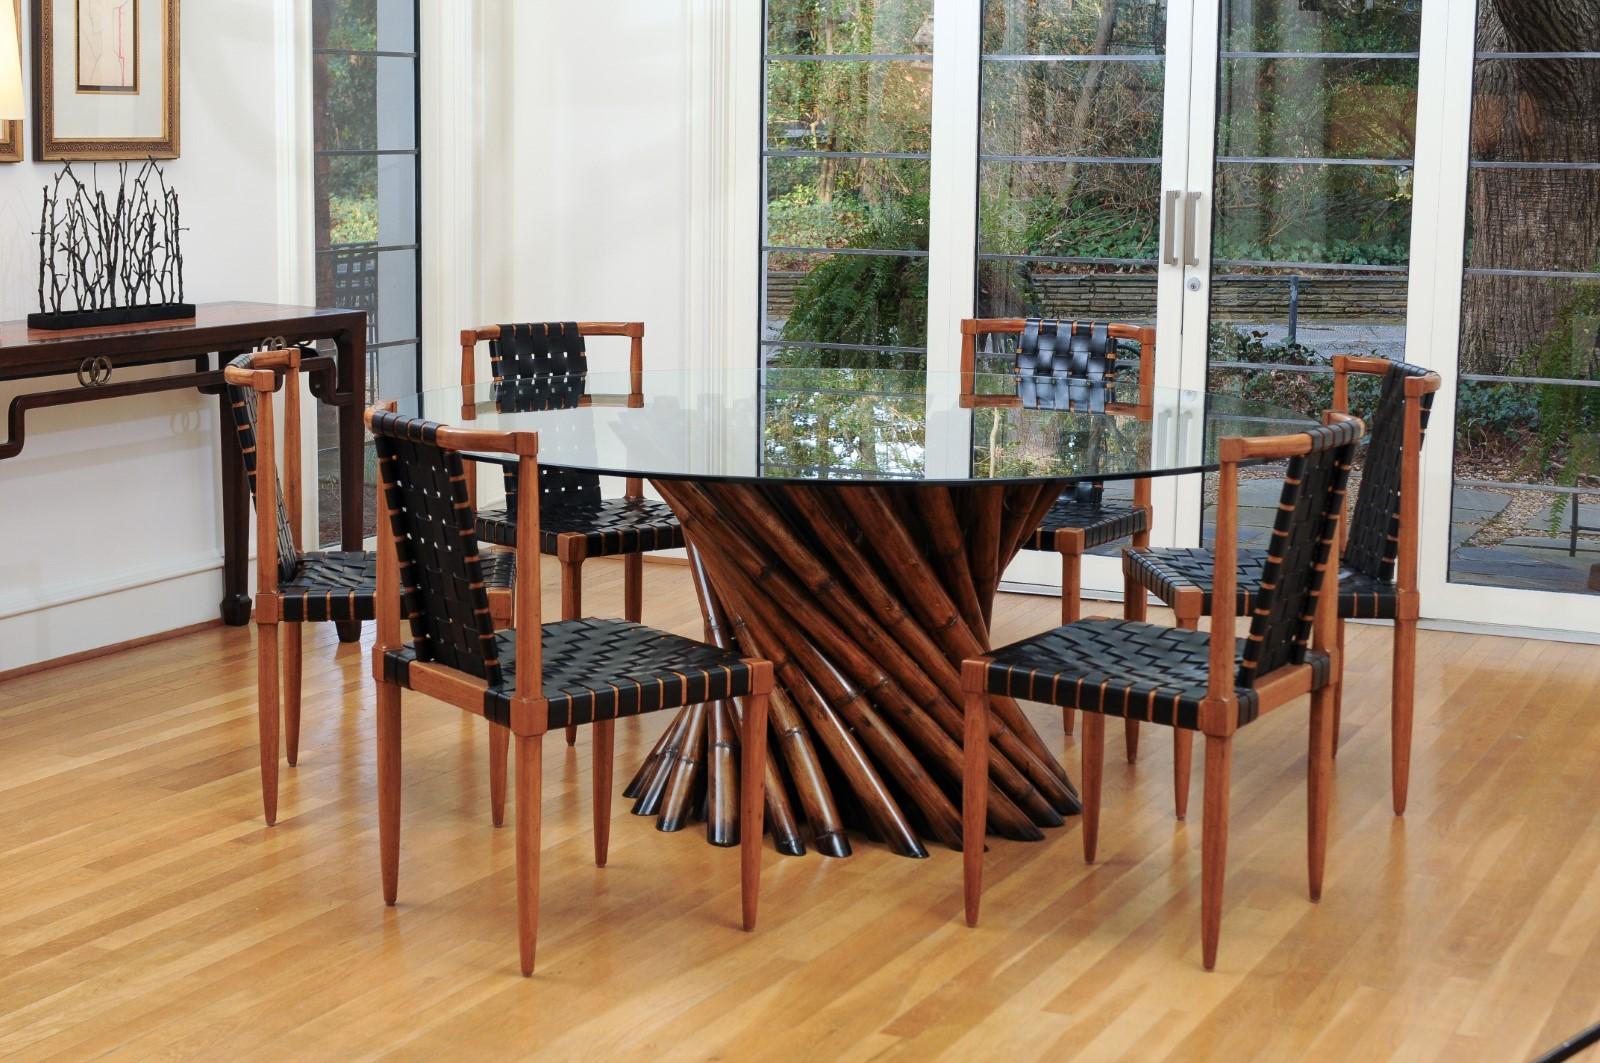 A remarkable restored pedestal bamboo cluster center or dining table by the Visionary Budji Layug, circa 1980. Large, mature stalks of cut bamboo cleverly constructed as a table base designed to shoulder a large heavy glass top. Stout and